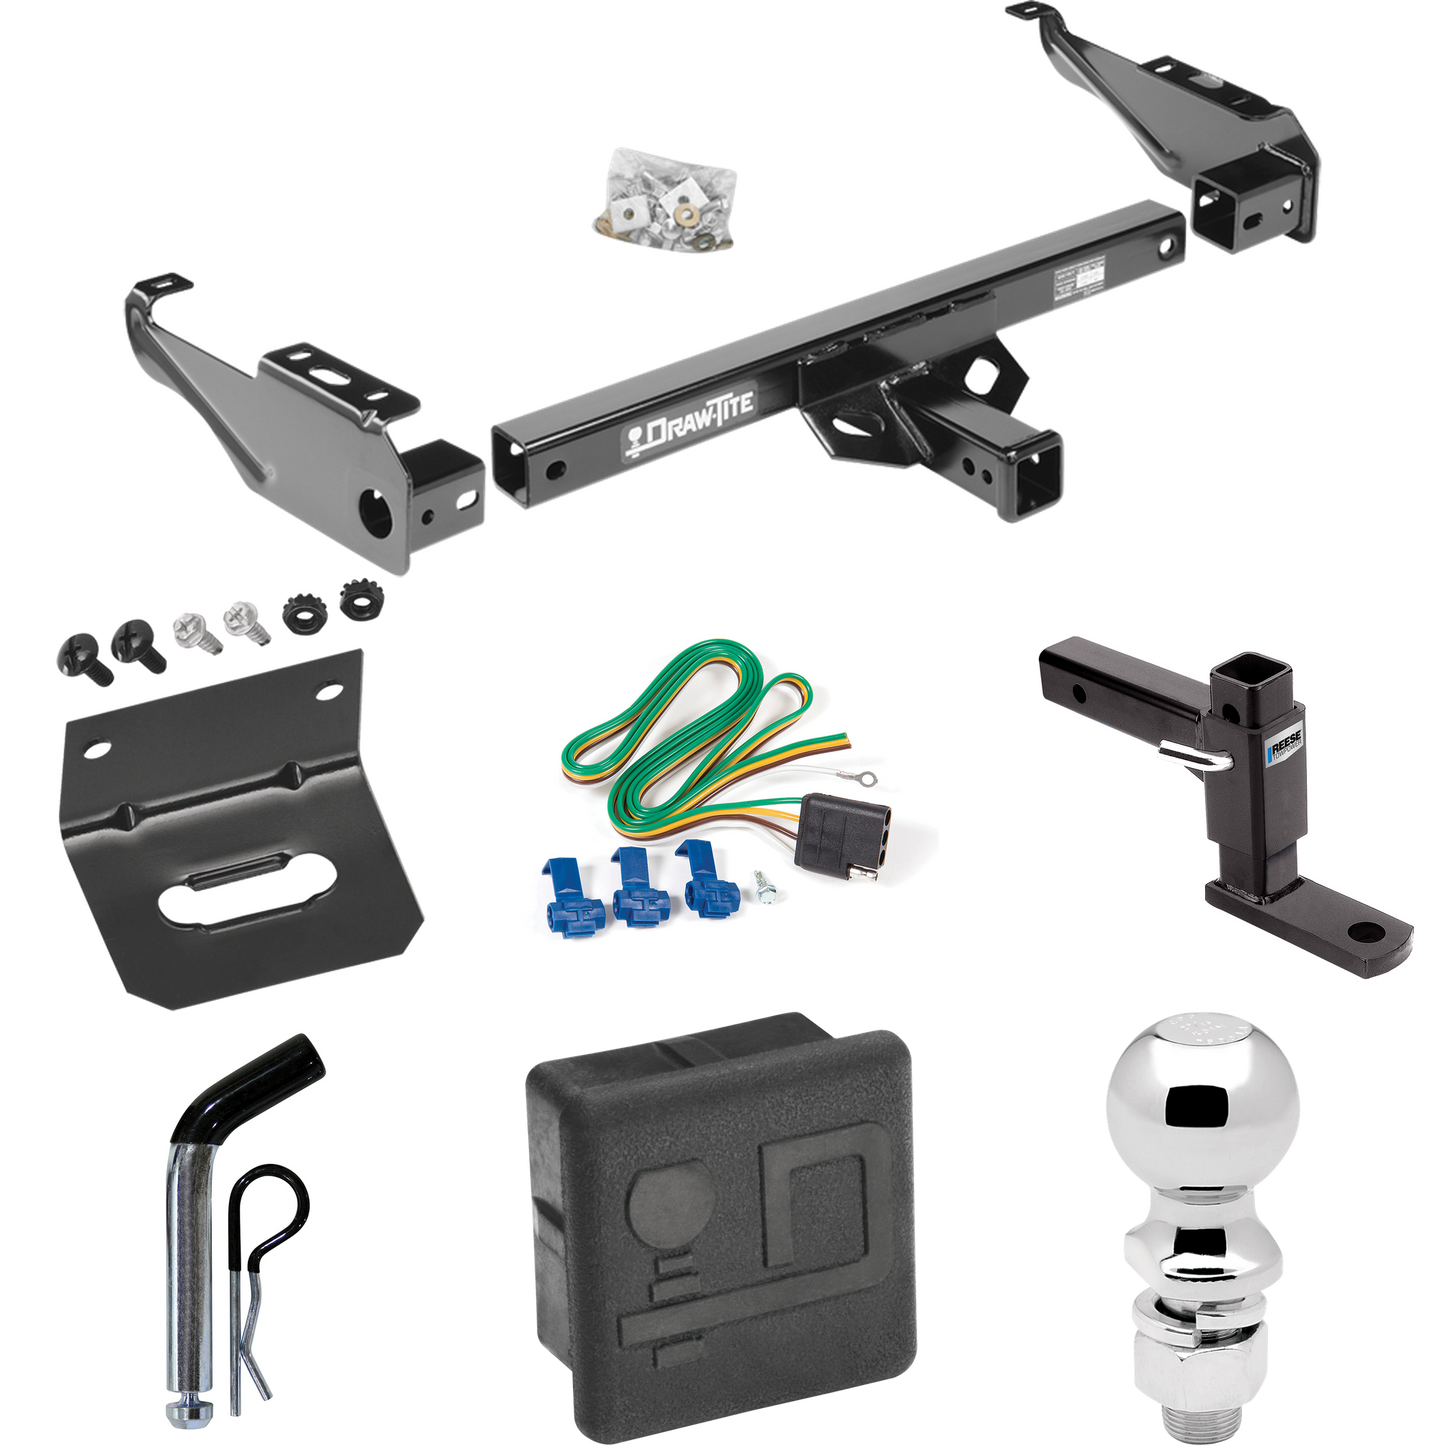 Fits 1967-1980 Dodge W200 Trailer Hitch Tow PKG w/ 4-Flat Wiring + Adjustable Drop Rise Ball Mount + Pin/Clip + 2-5/16" Ball + Wiring Bracket + Hitch Cover By Draw-Tite